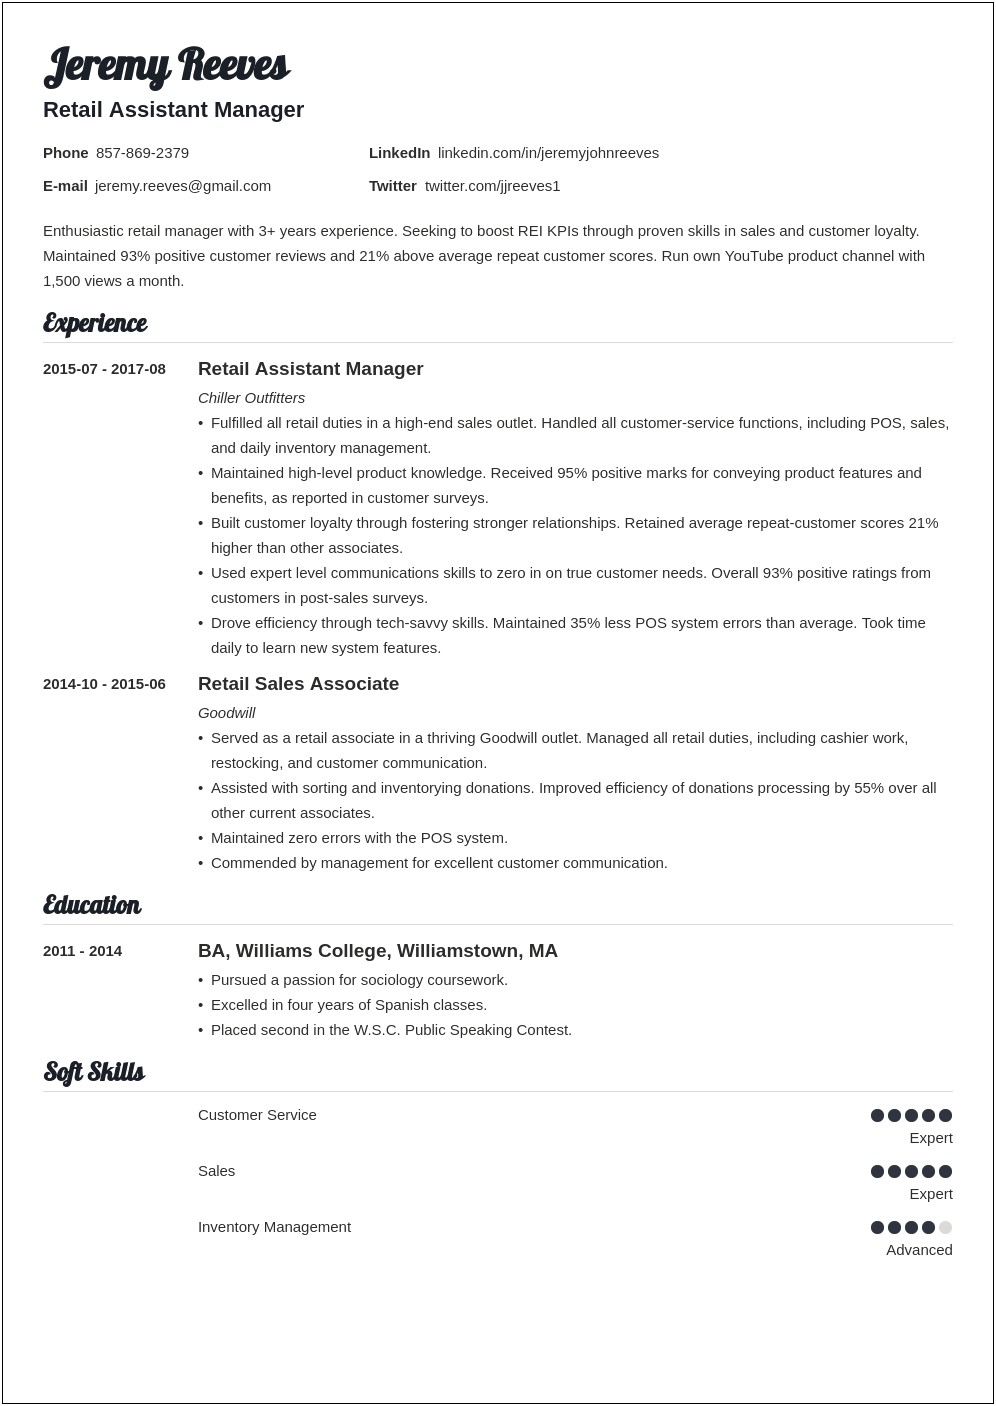 Resume Words To Describe Retail Assistant Manager